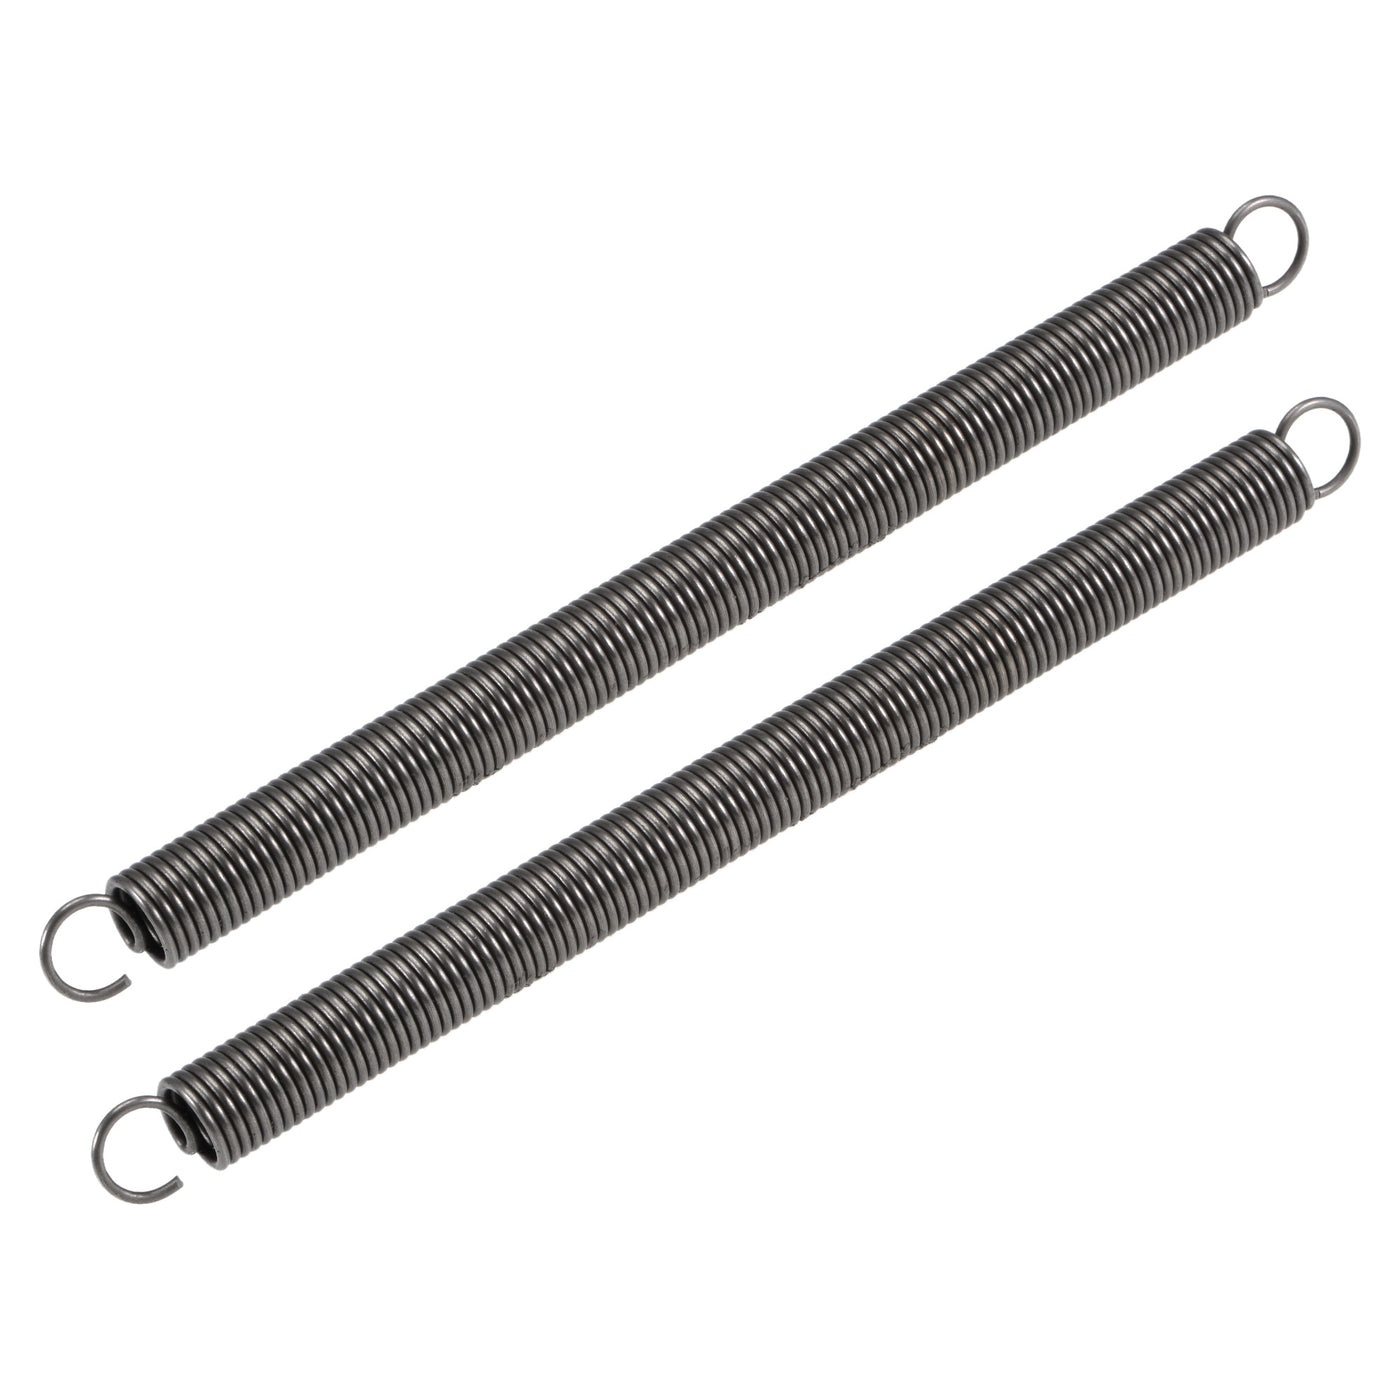 Uxcell Uxcell 1.2mmx10mmx150mm Extended Compression Spring ,6.6Lbs Load Capacity,Grey 2pcs